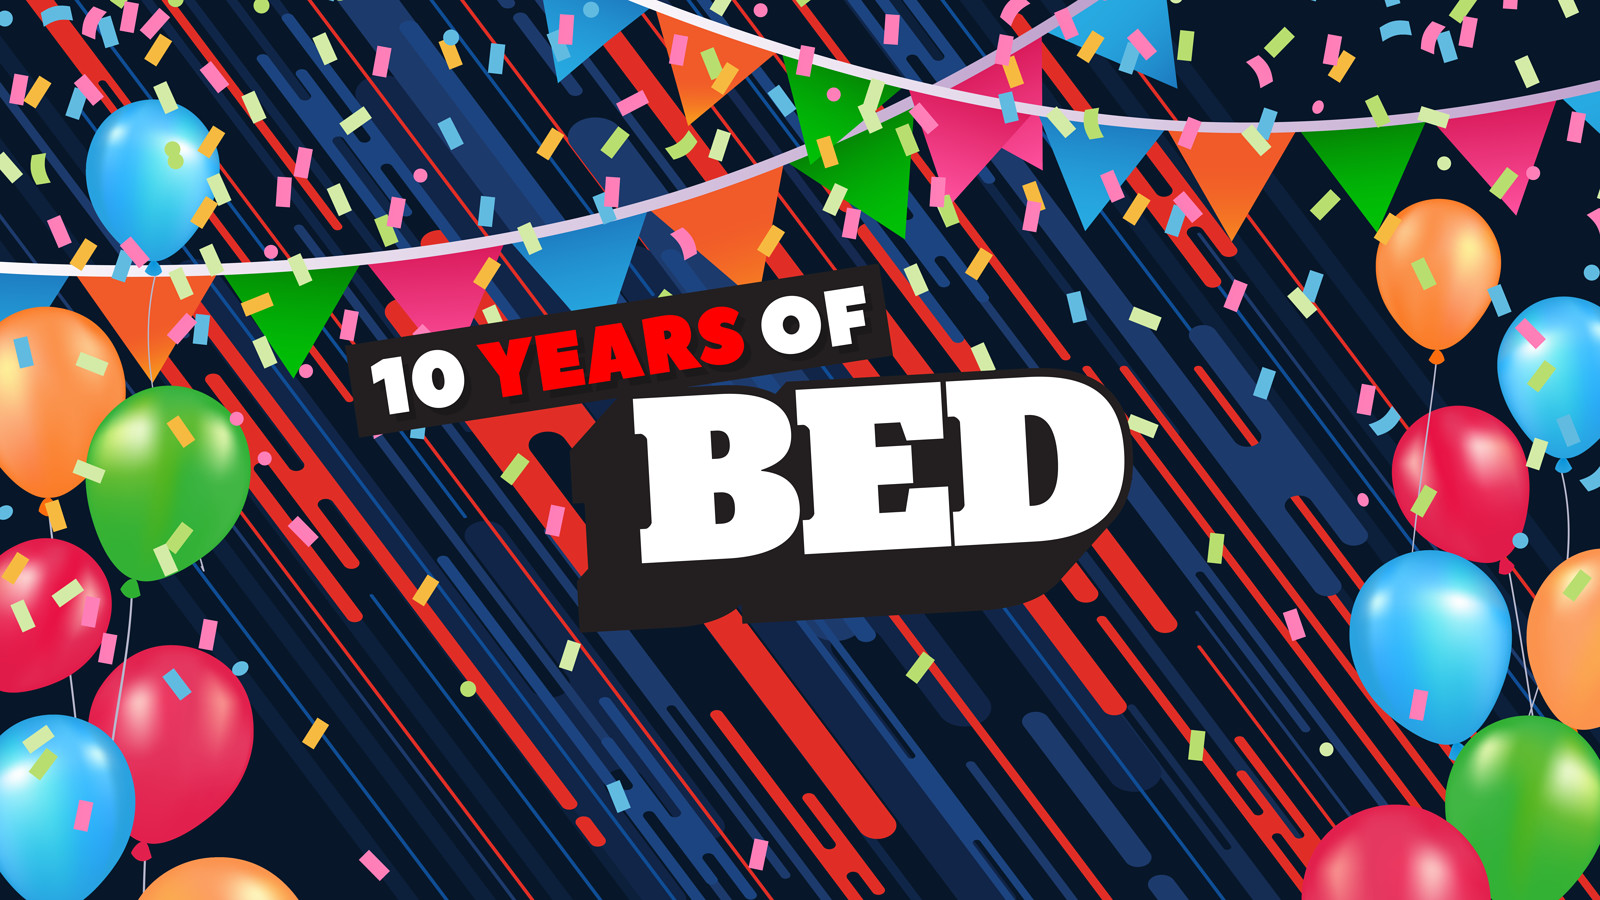 BED Bristol: 10 Years of BED at Gravity Nightclub